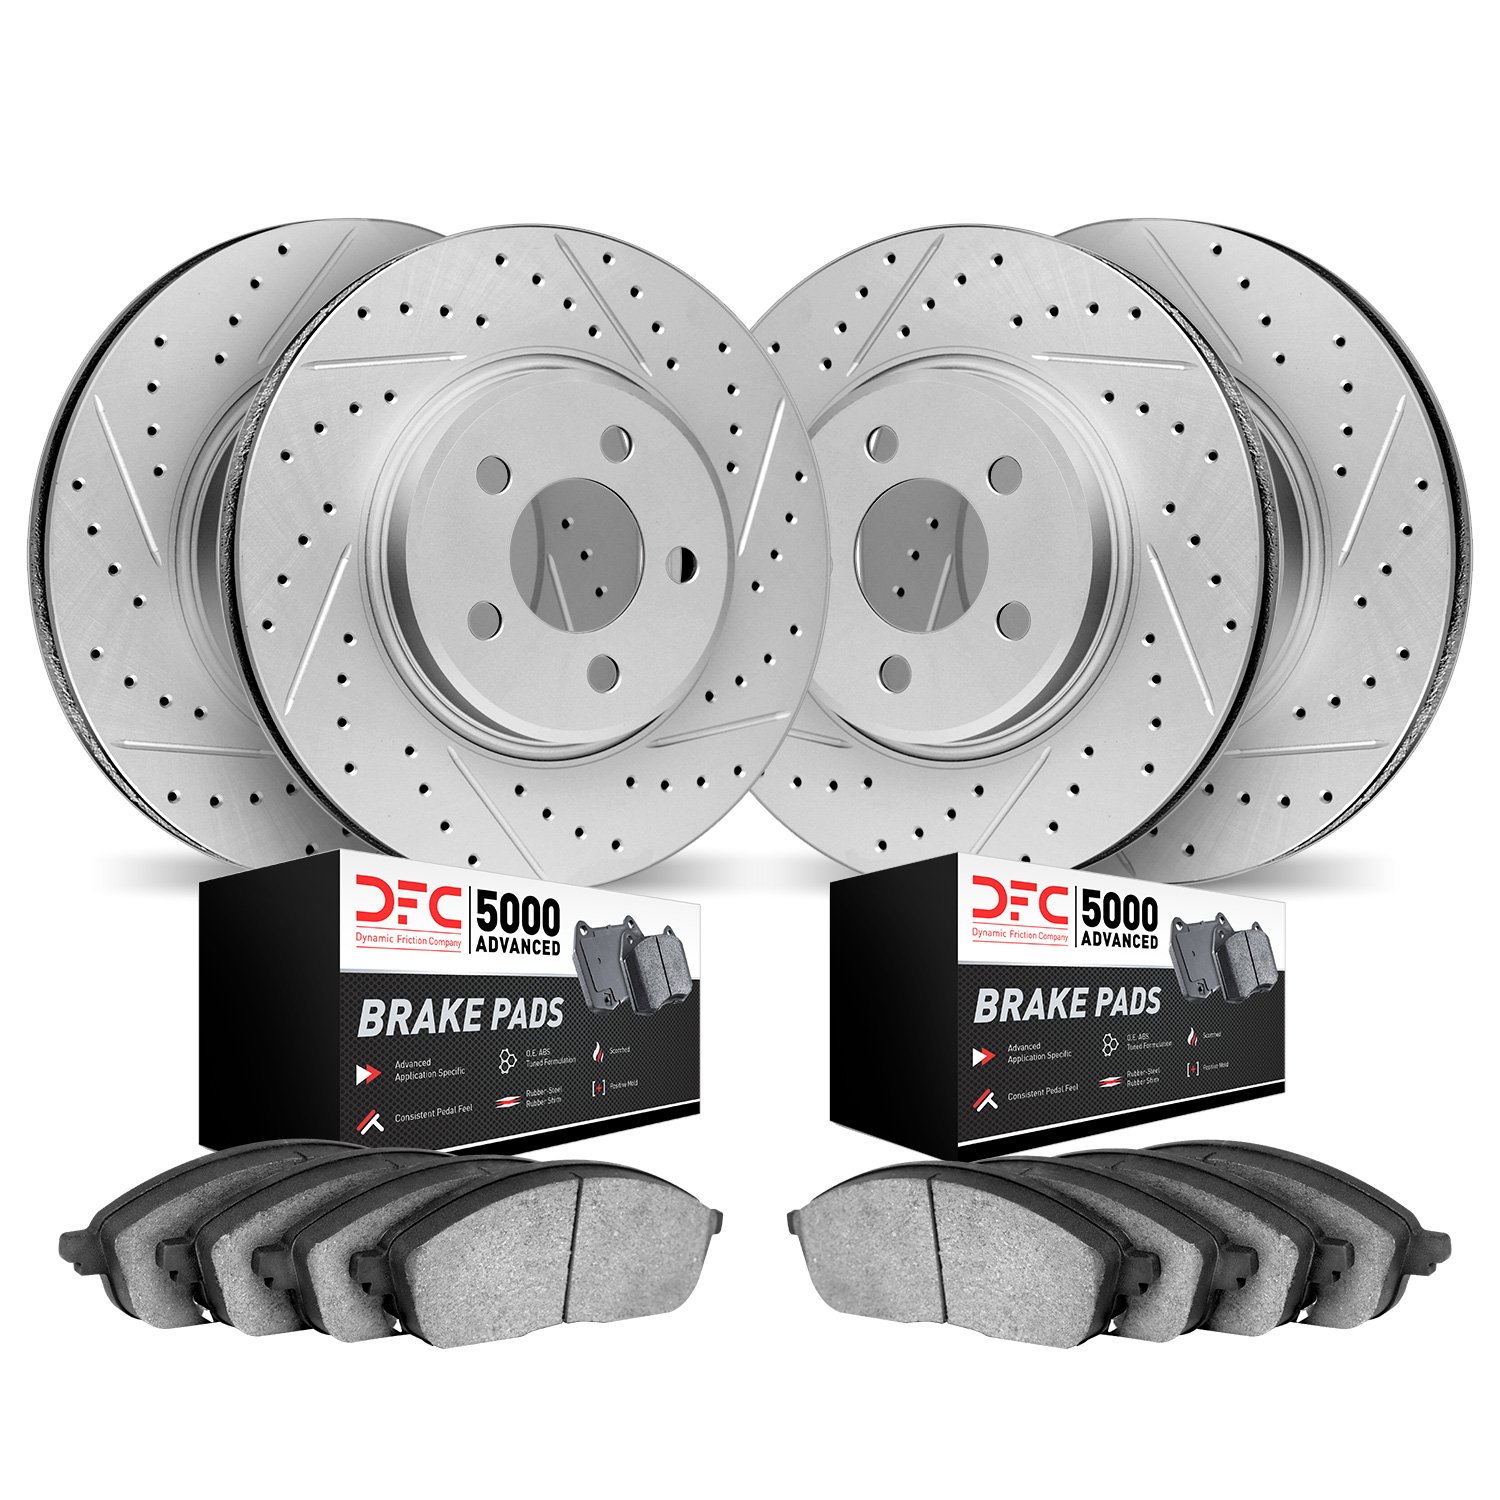 2504-31015 Geoperformance Drilled/Slotted Rotors w/5000 Advanced Brake Pads Kit, 2006-2007 BMW, Position: Front and Rear